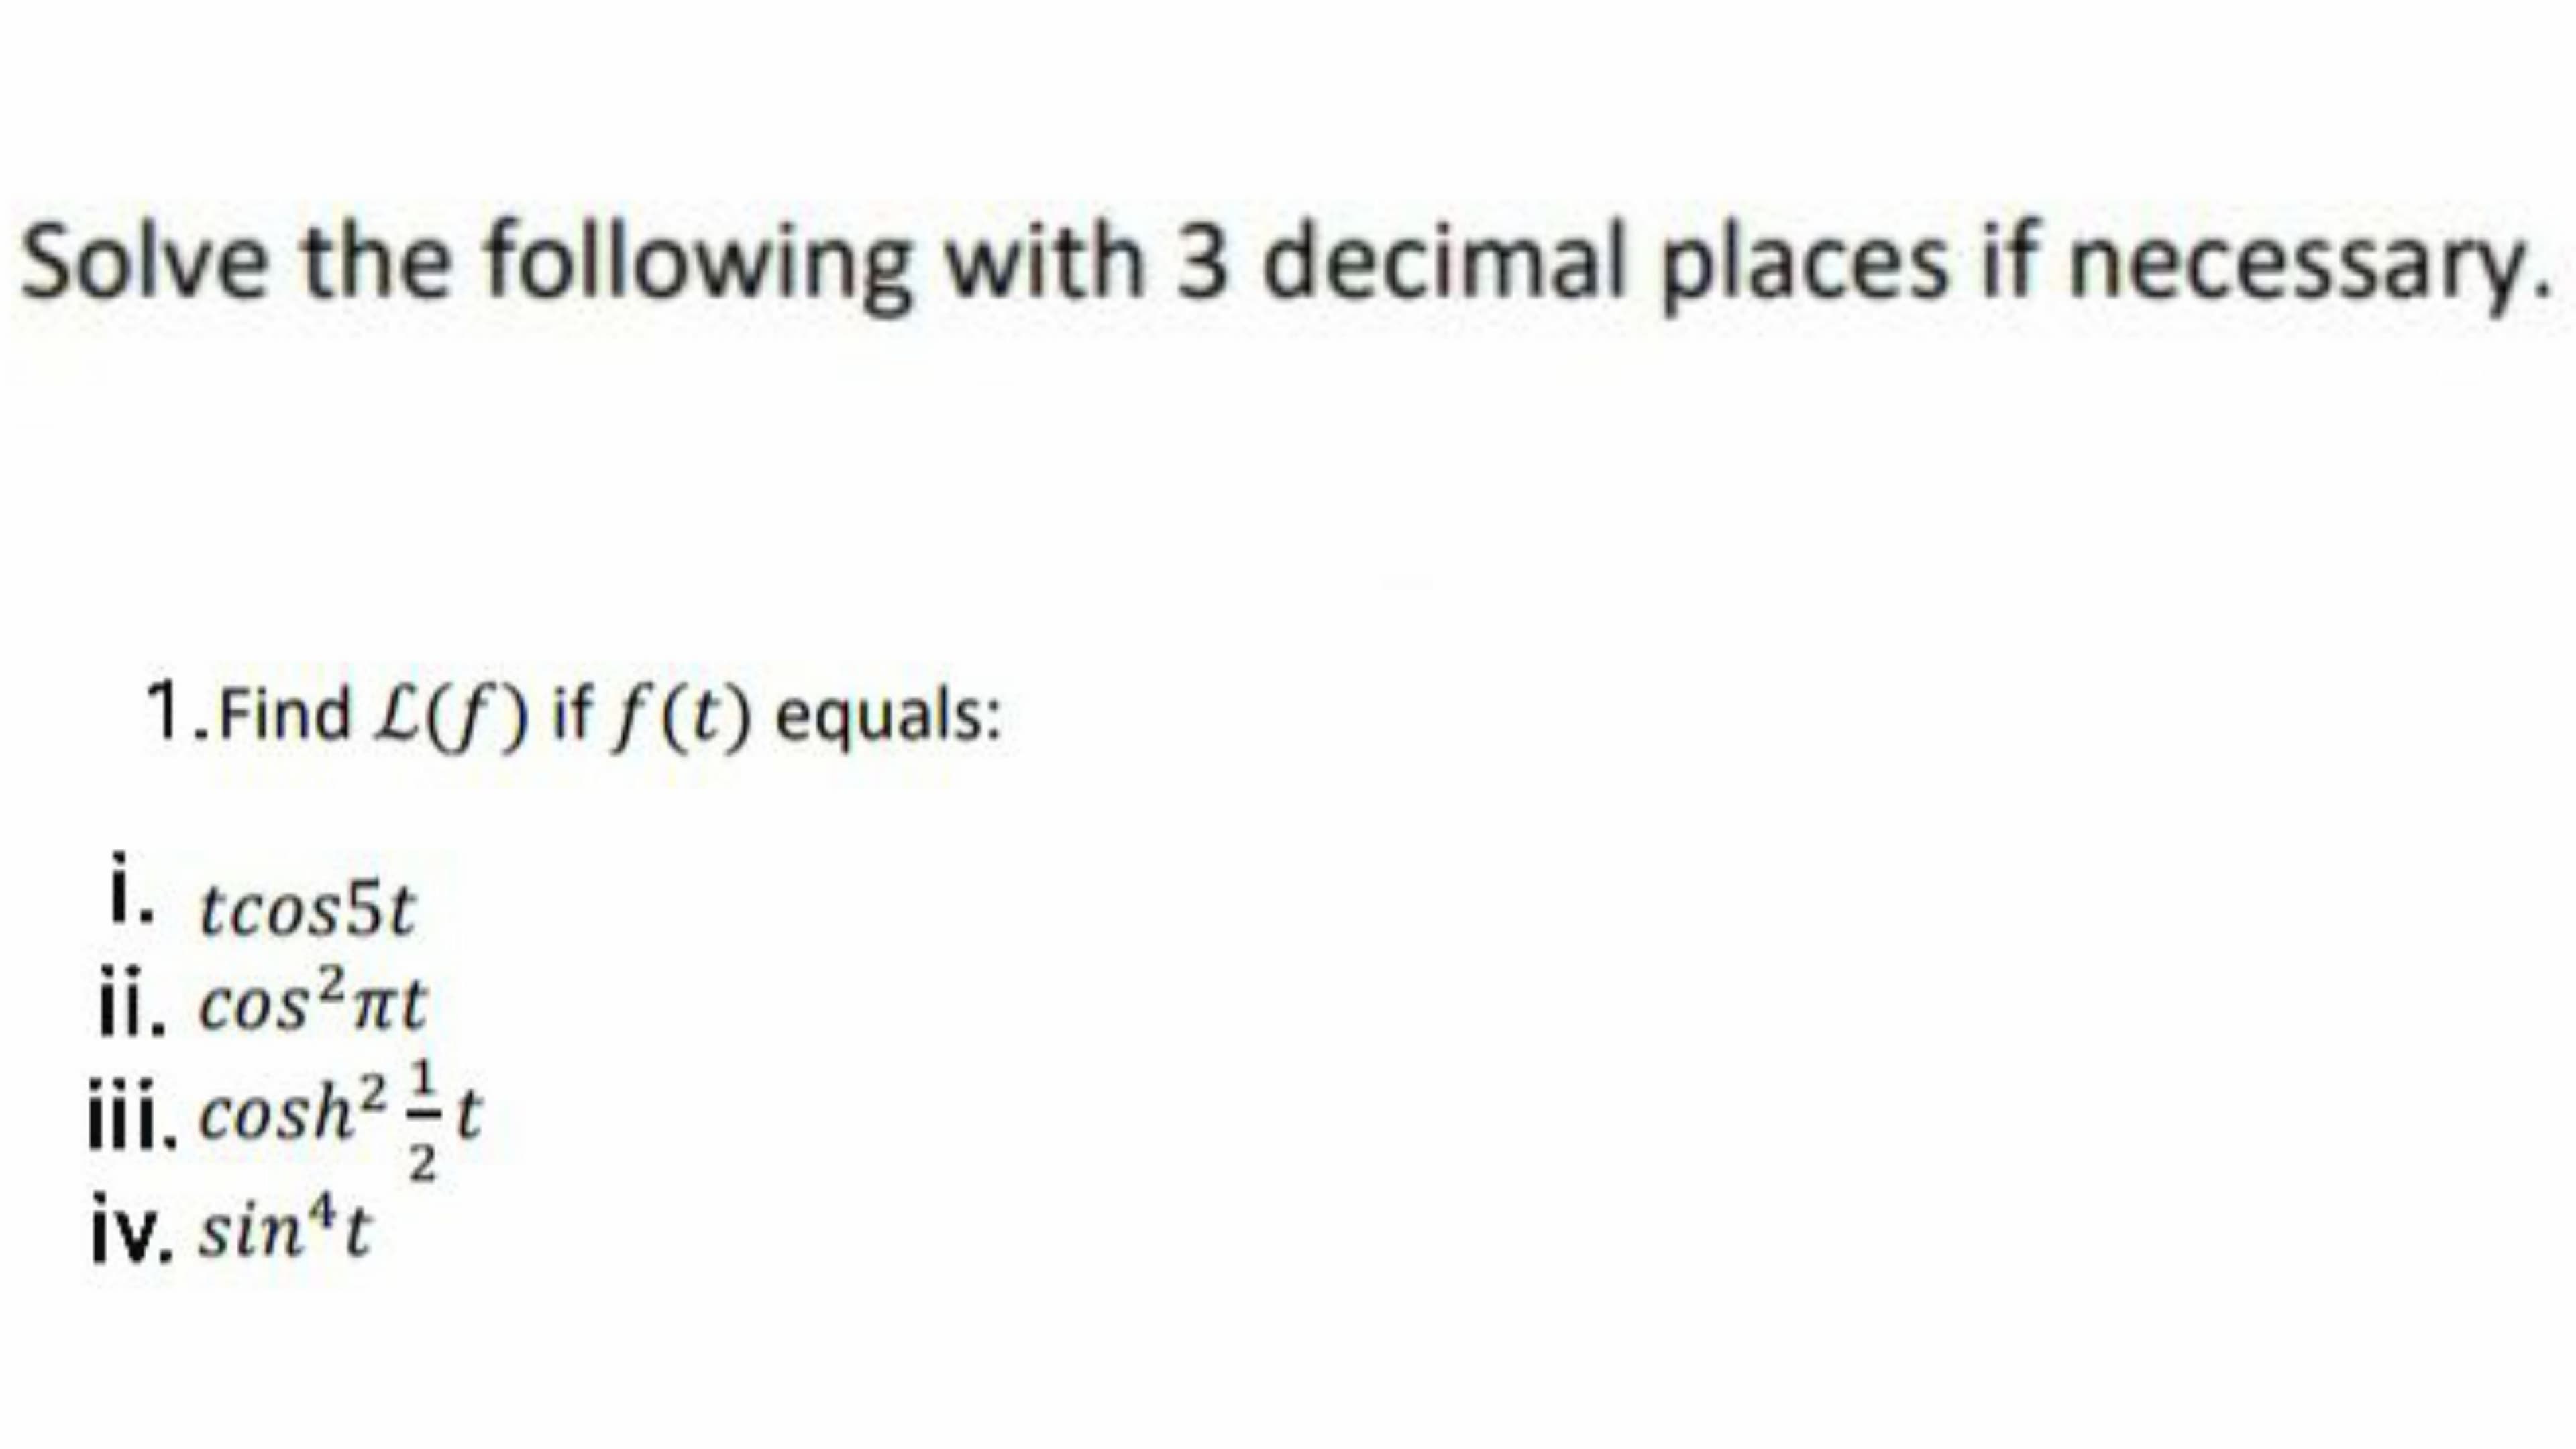 Solve the following with 3 decimal places if necessary.
1.Find L(f) if f(t) equals:
i. tcos5t
ii. cos?nt
iii, cosh? t
iv. sin*t
